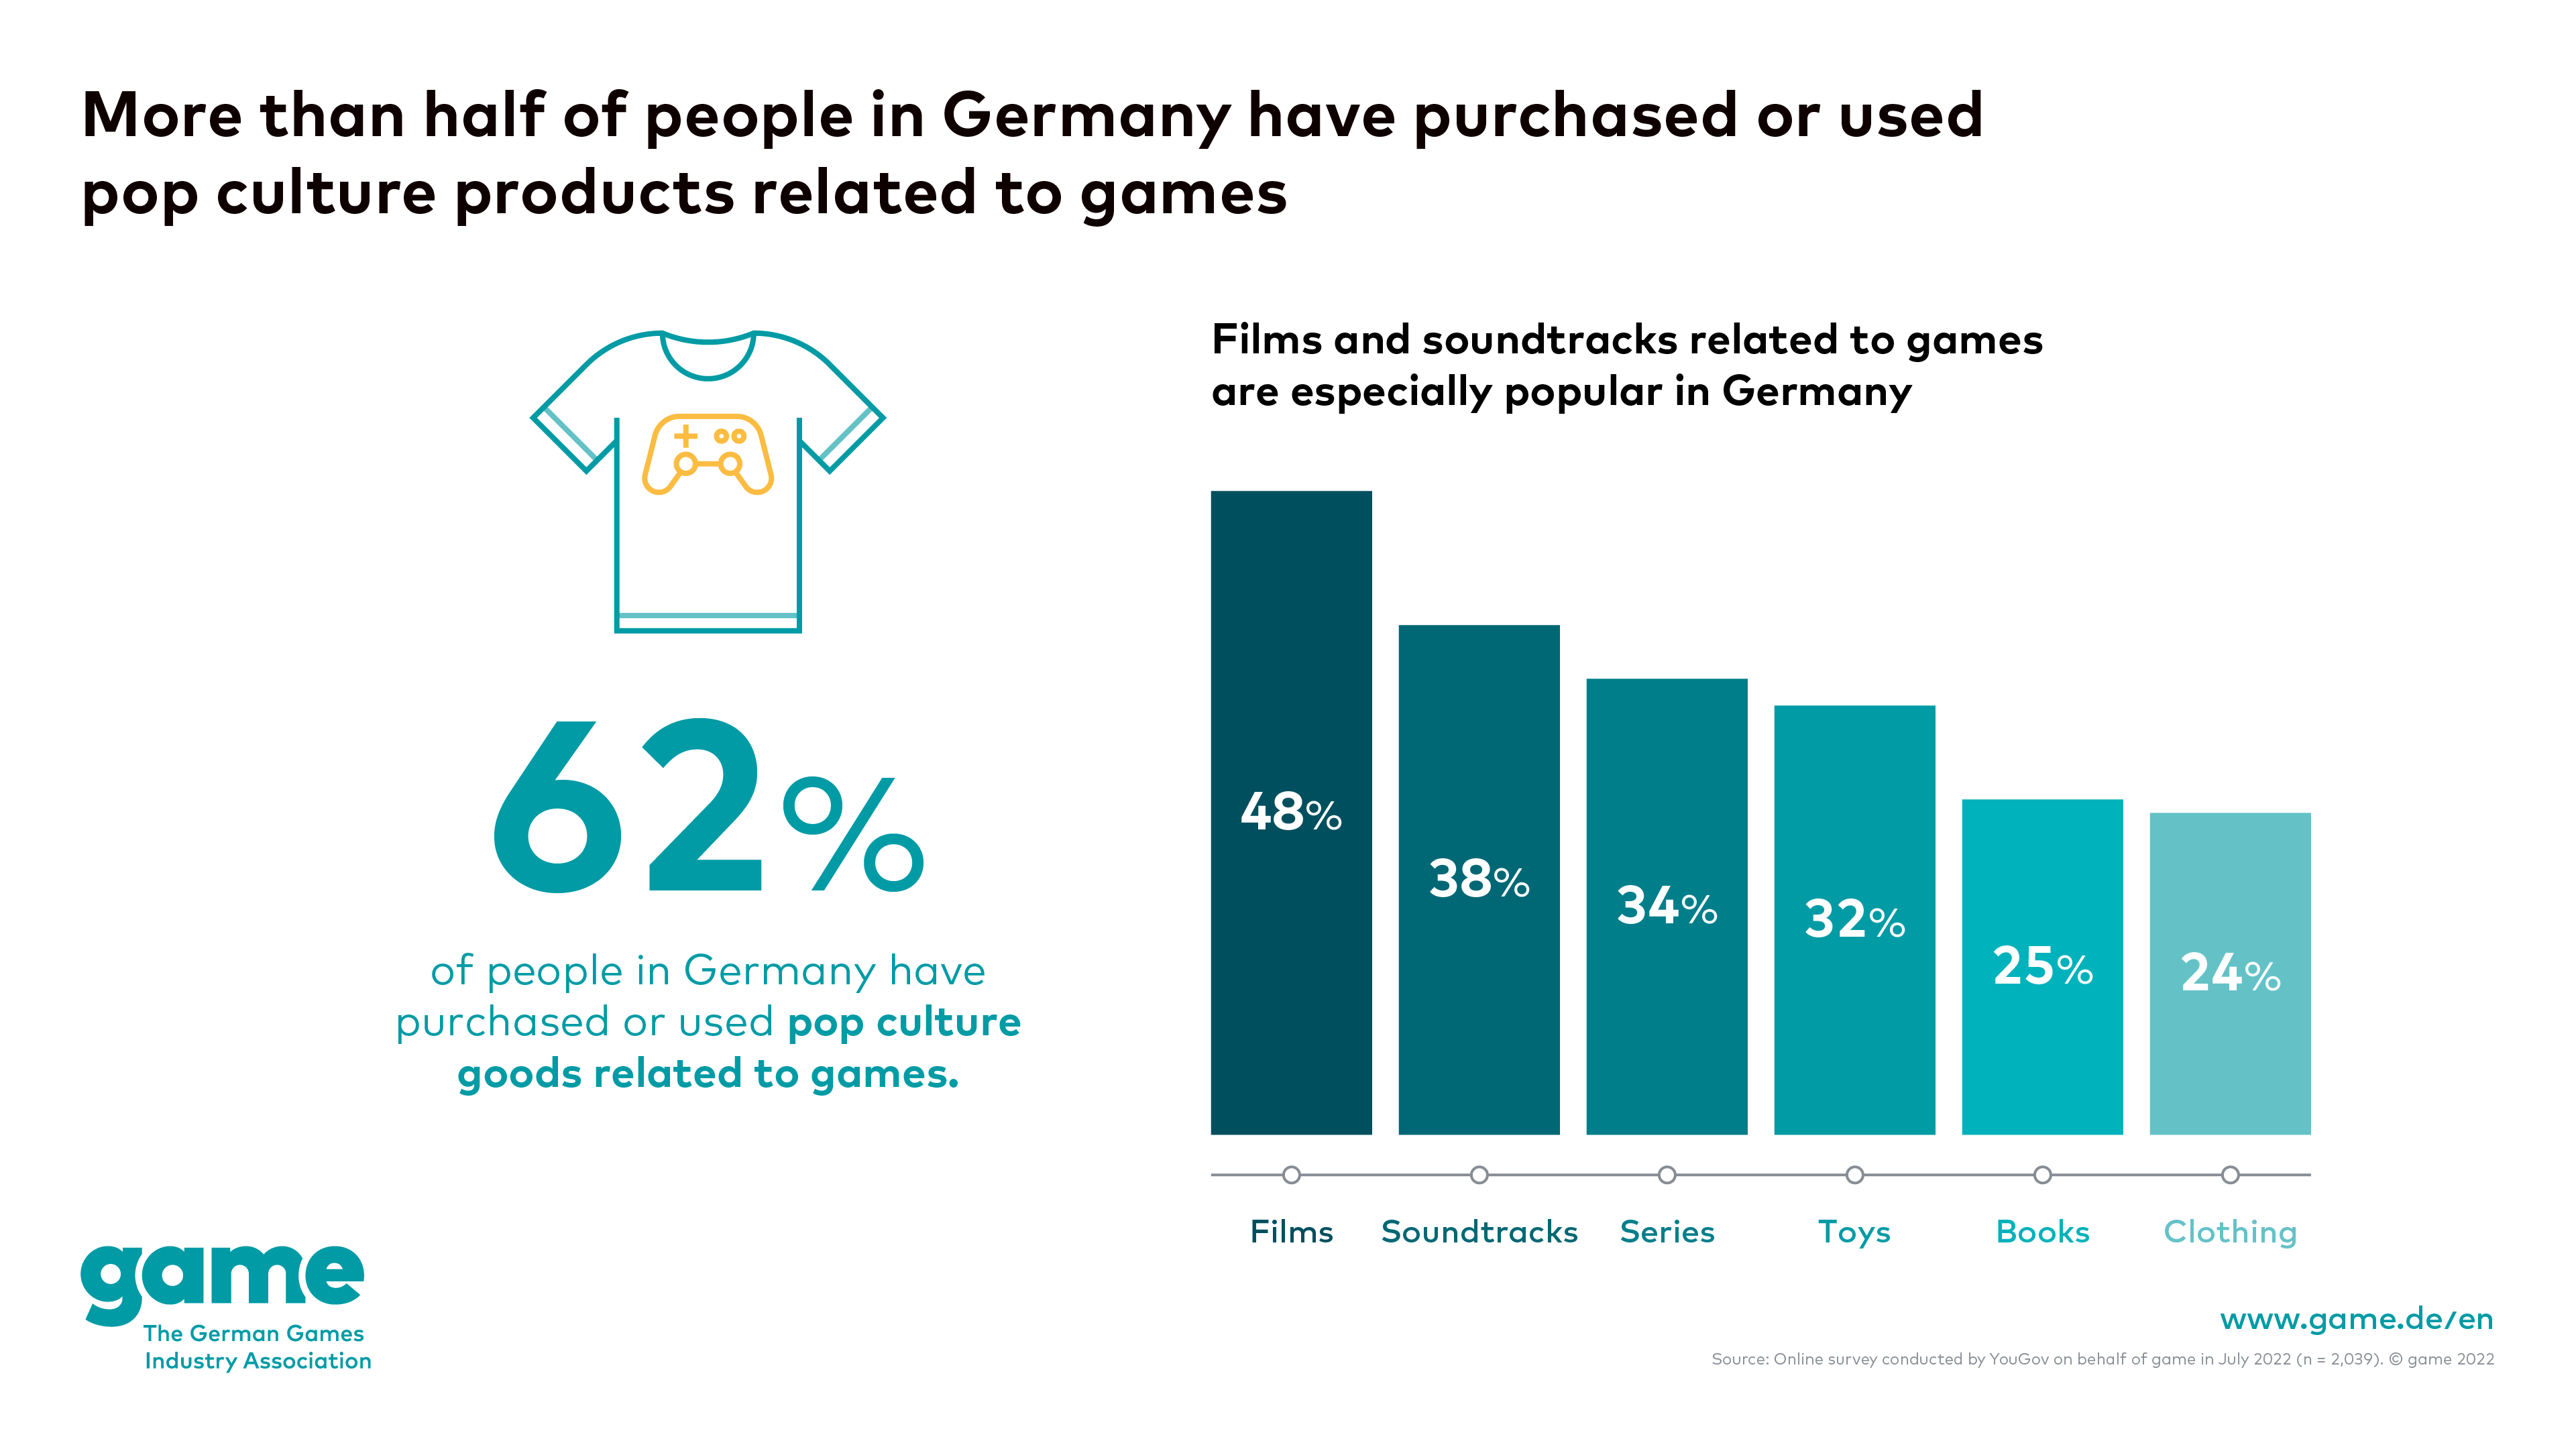 More than half of the people in Germany have purchased or used pop culture products related to games